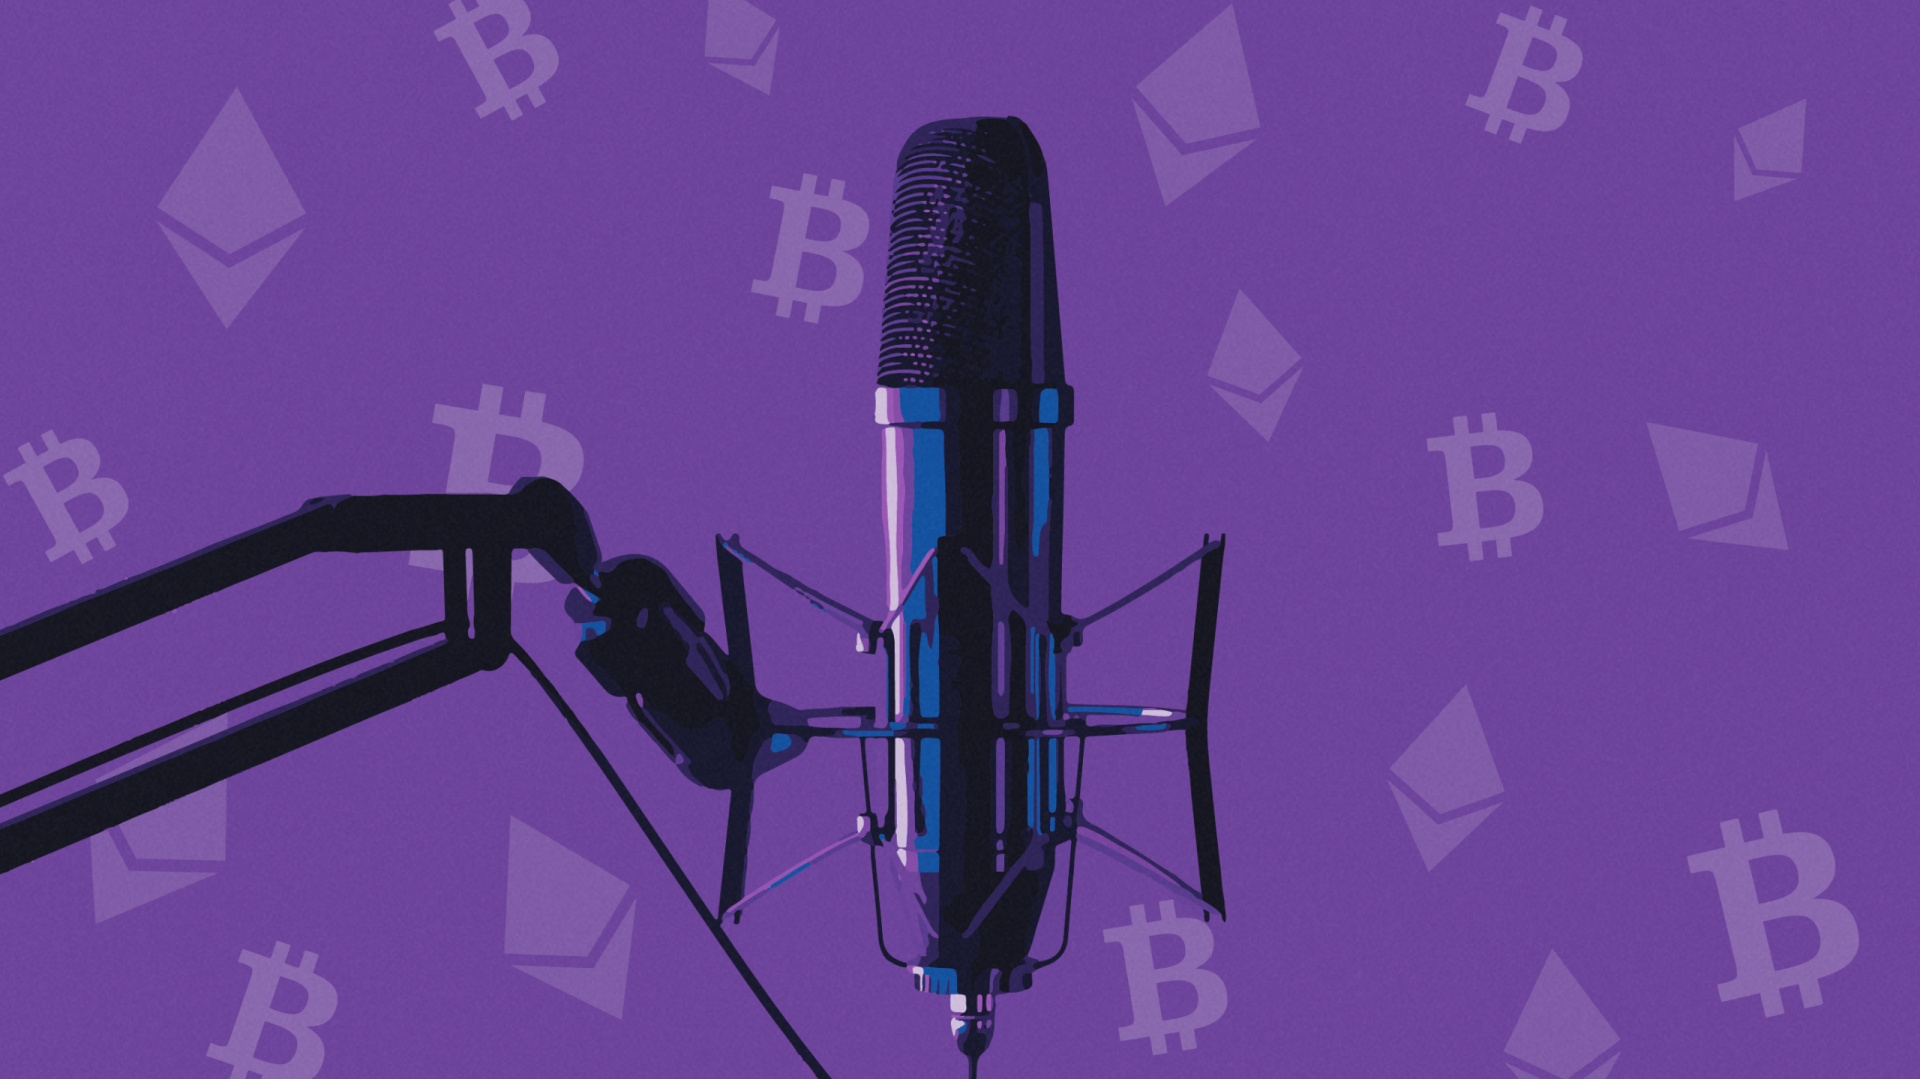 Best crypto podcasts feature